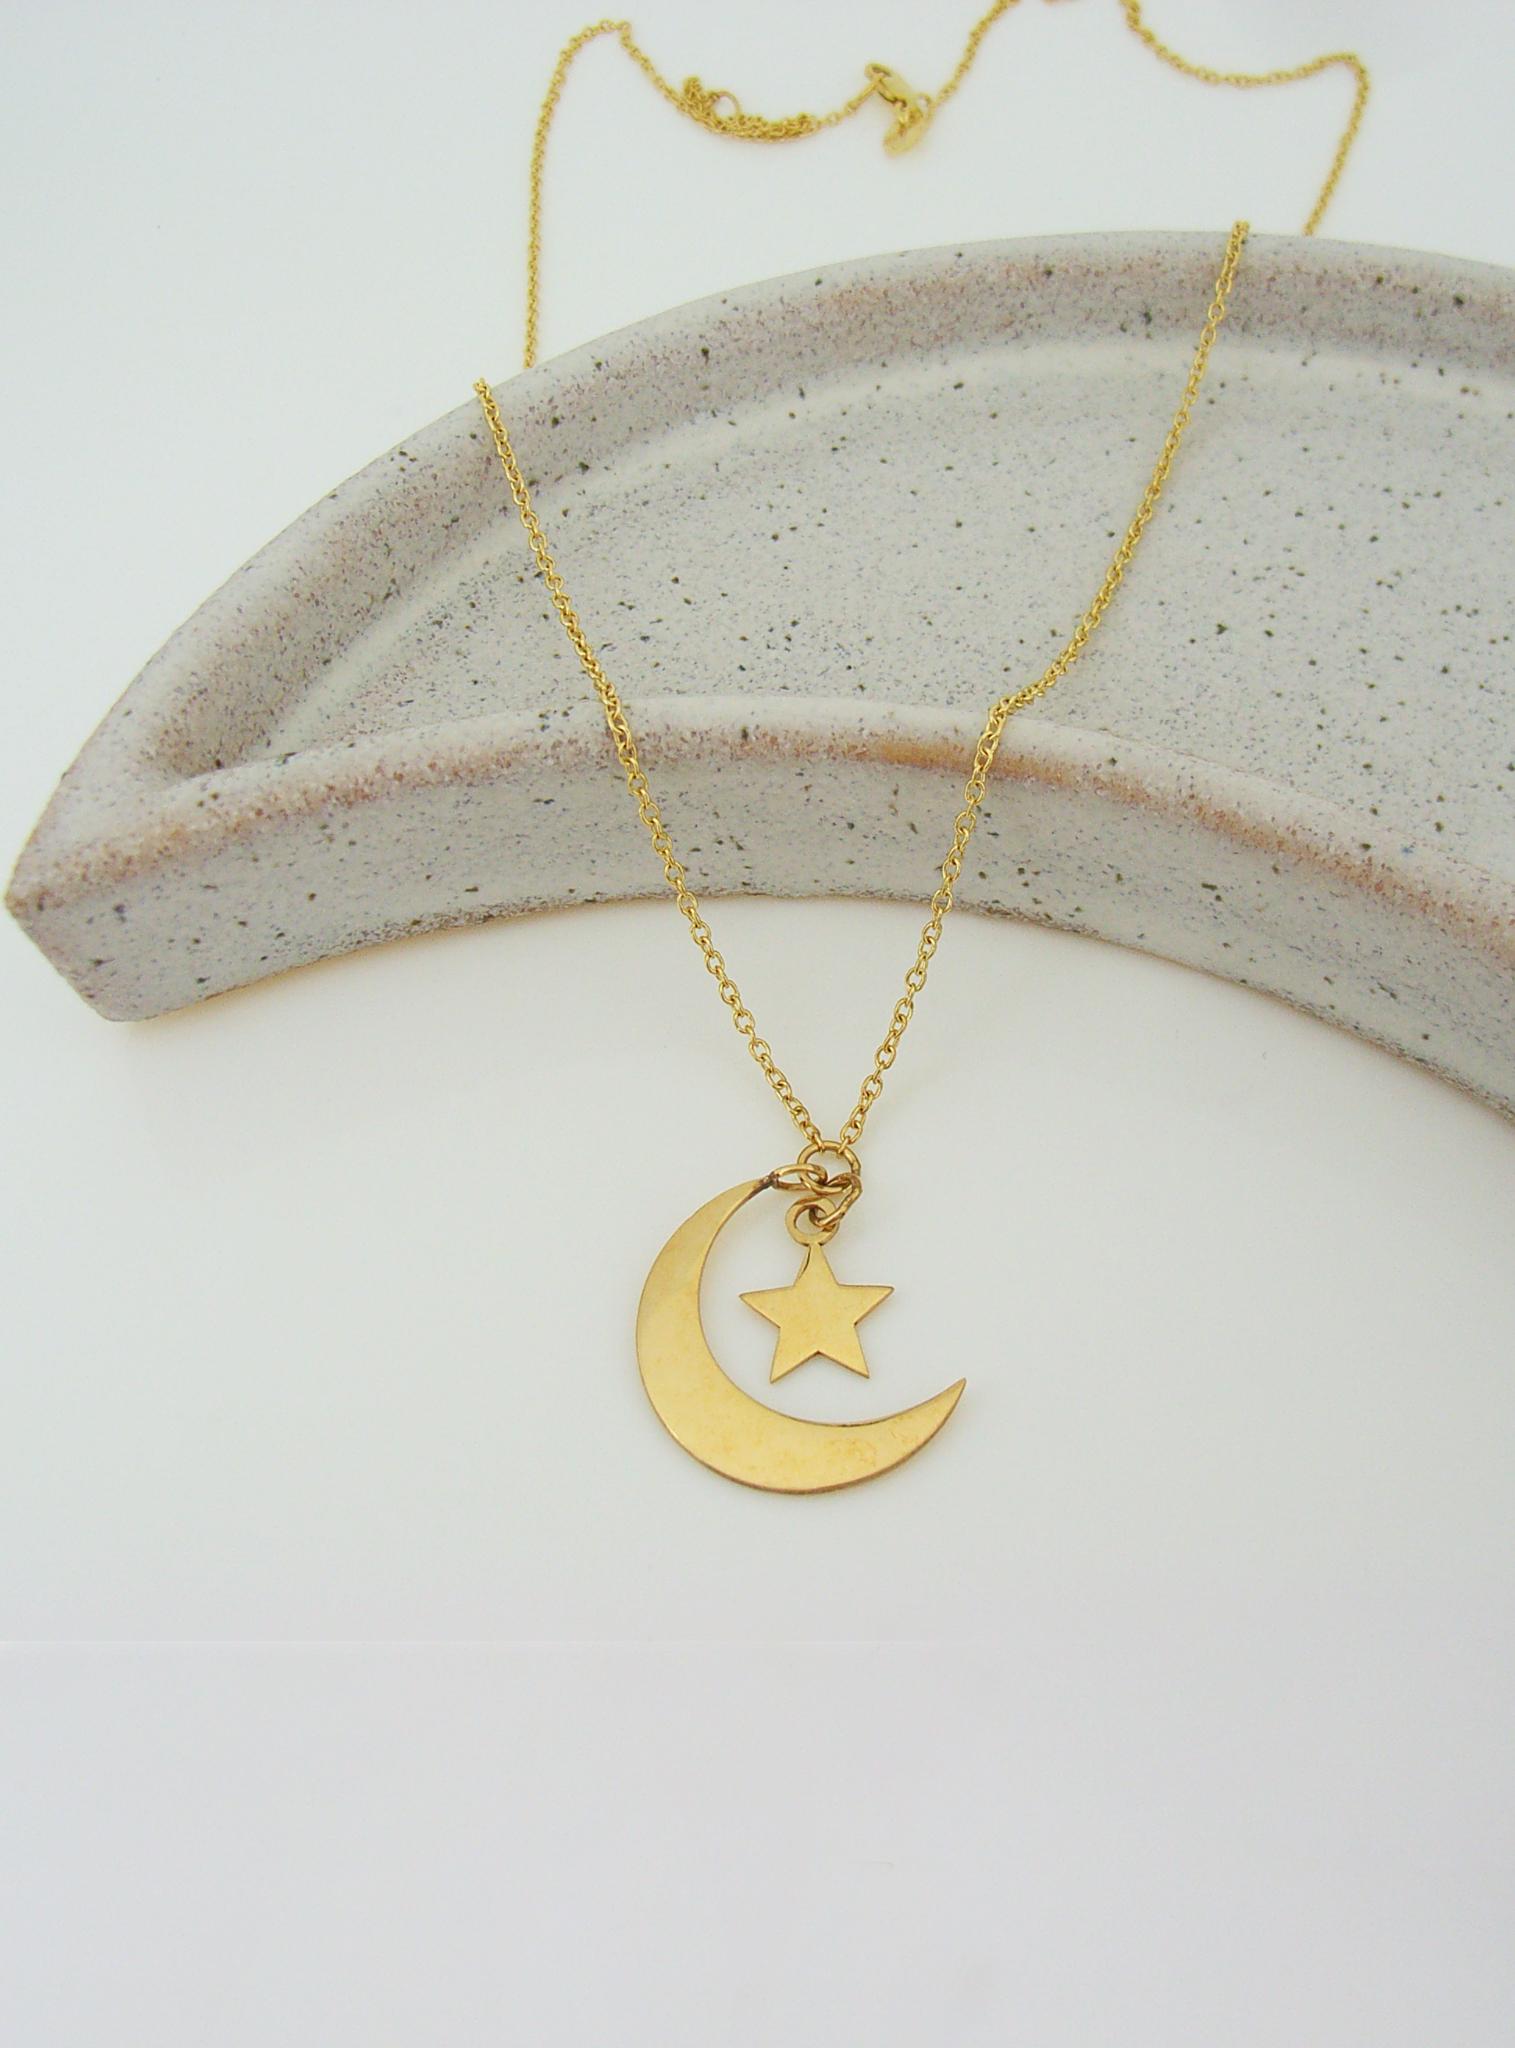 Upside Down Moon Necklace the CRESCENT Necklace in Gold | Etsy | Neck  jewellery, Moon necklace, Necklace set